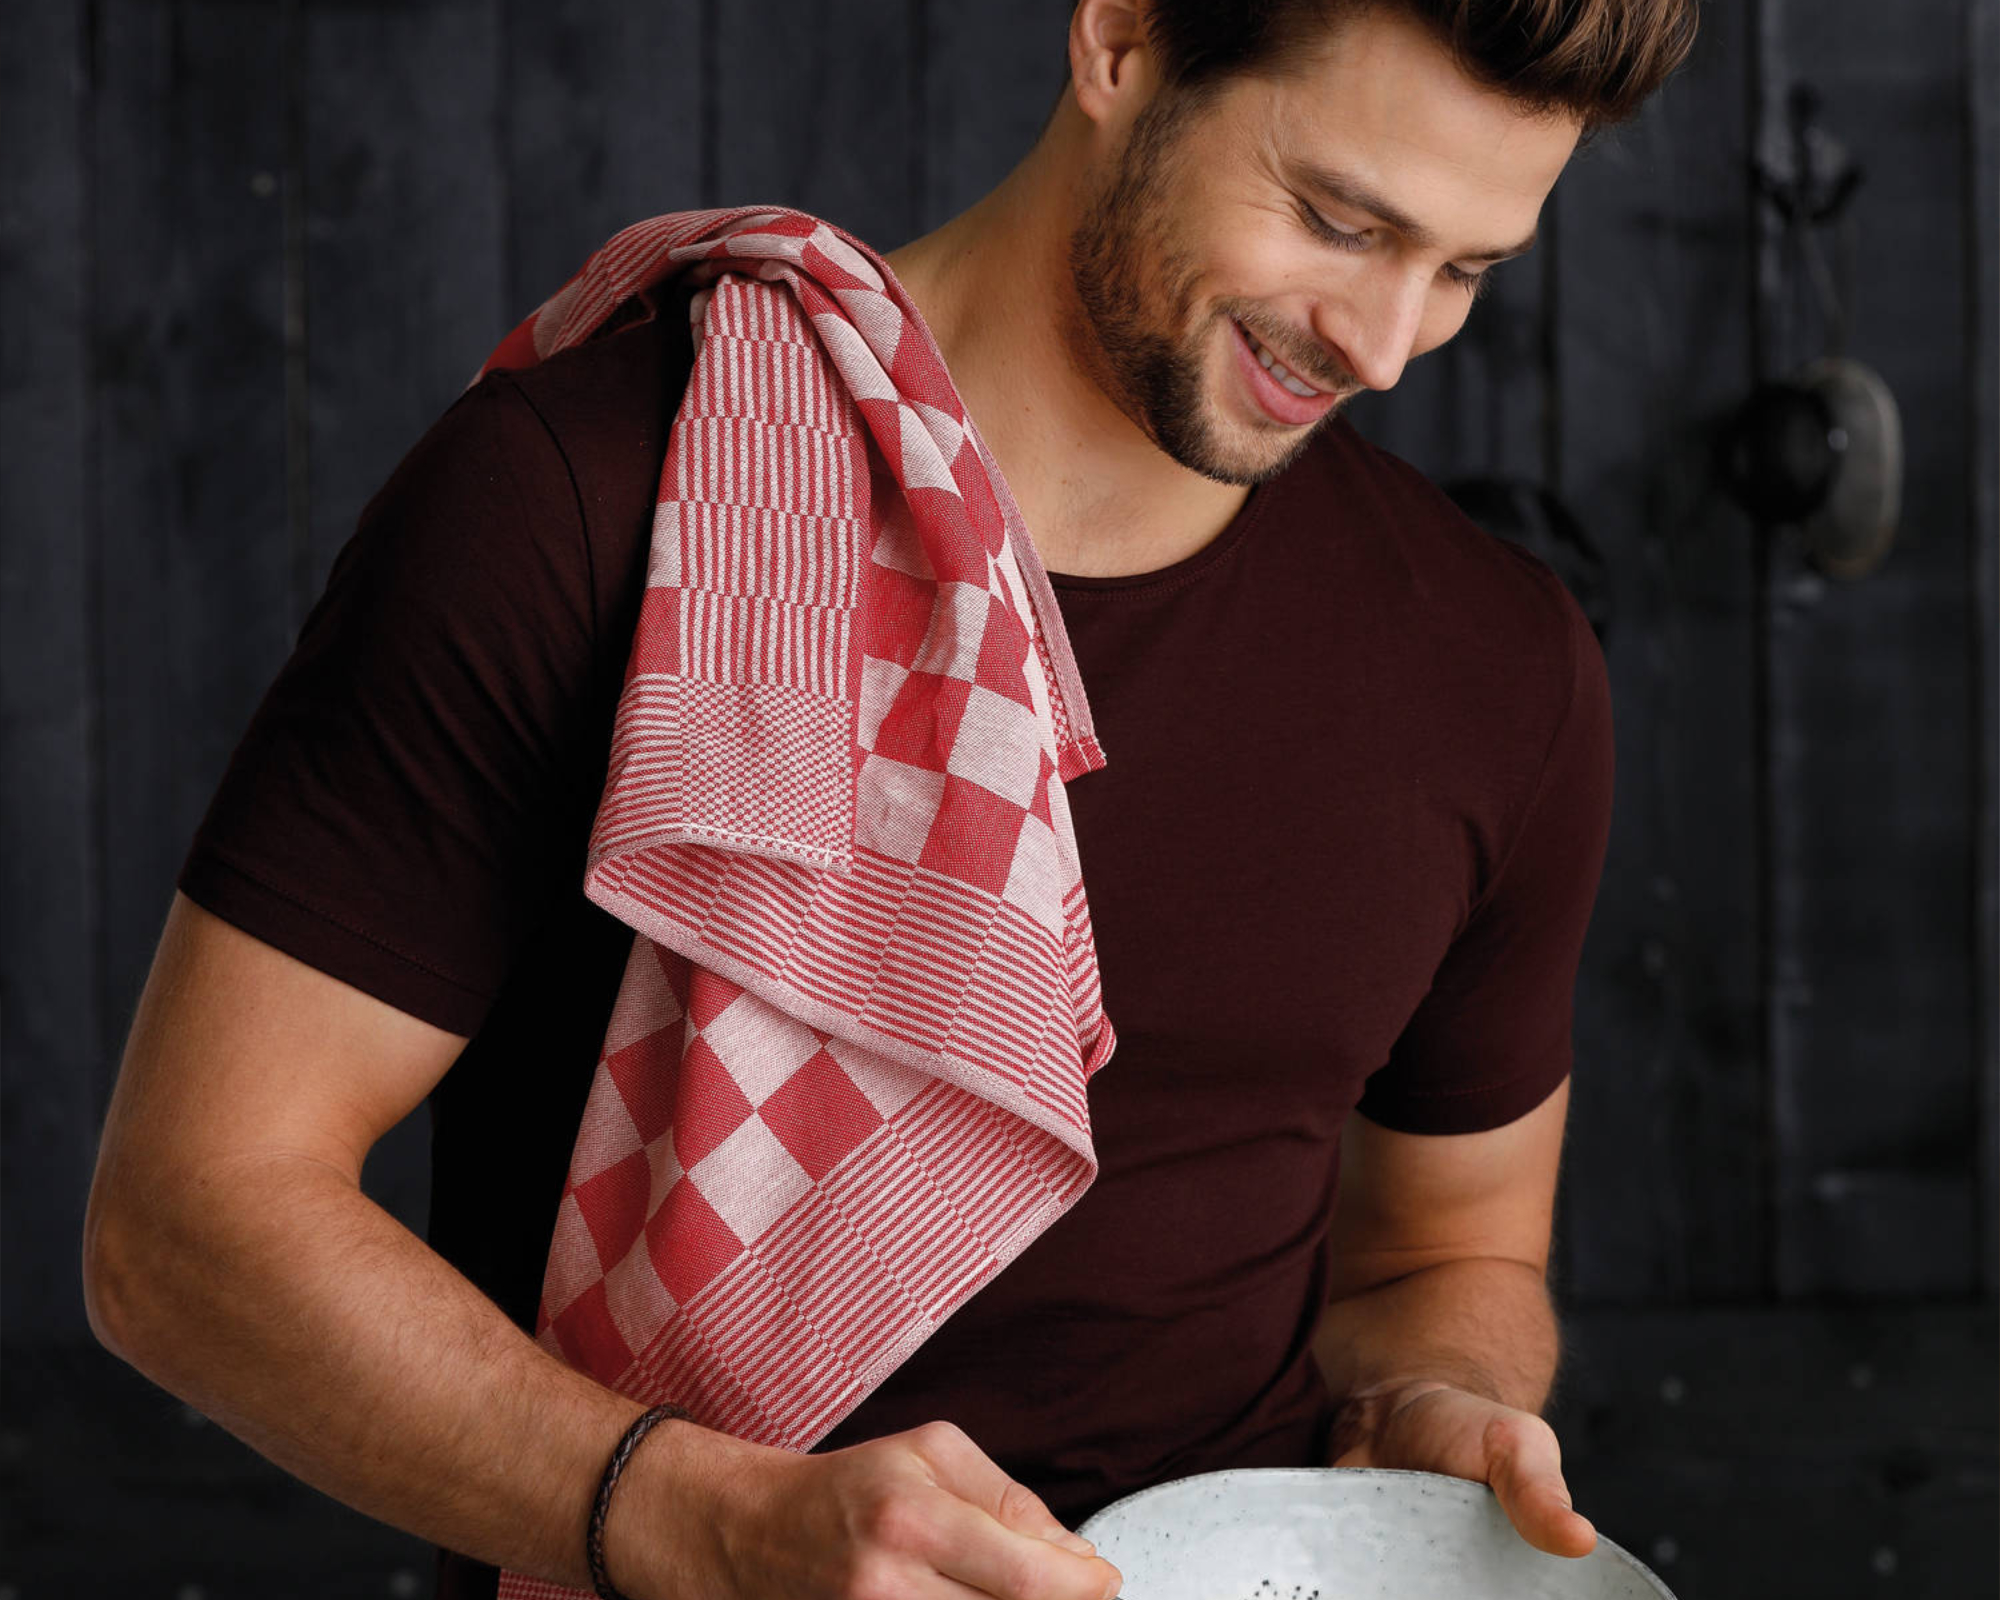 Kitchen towel BARBECUE red